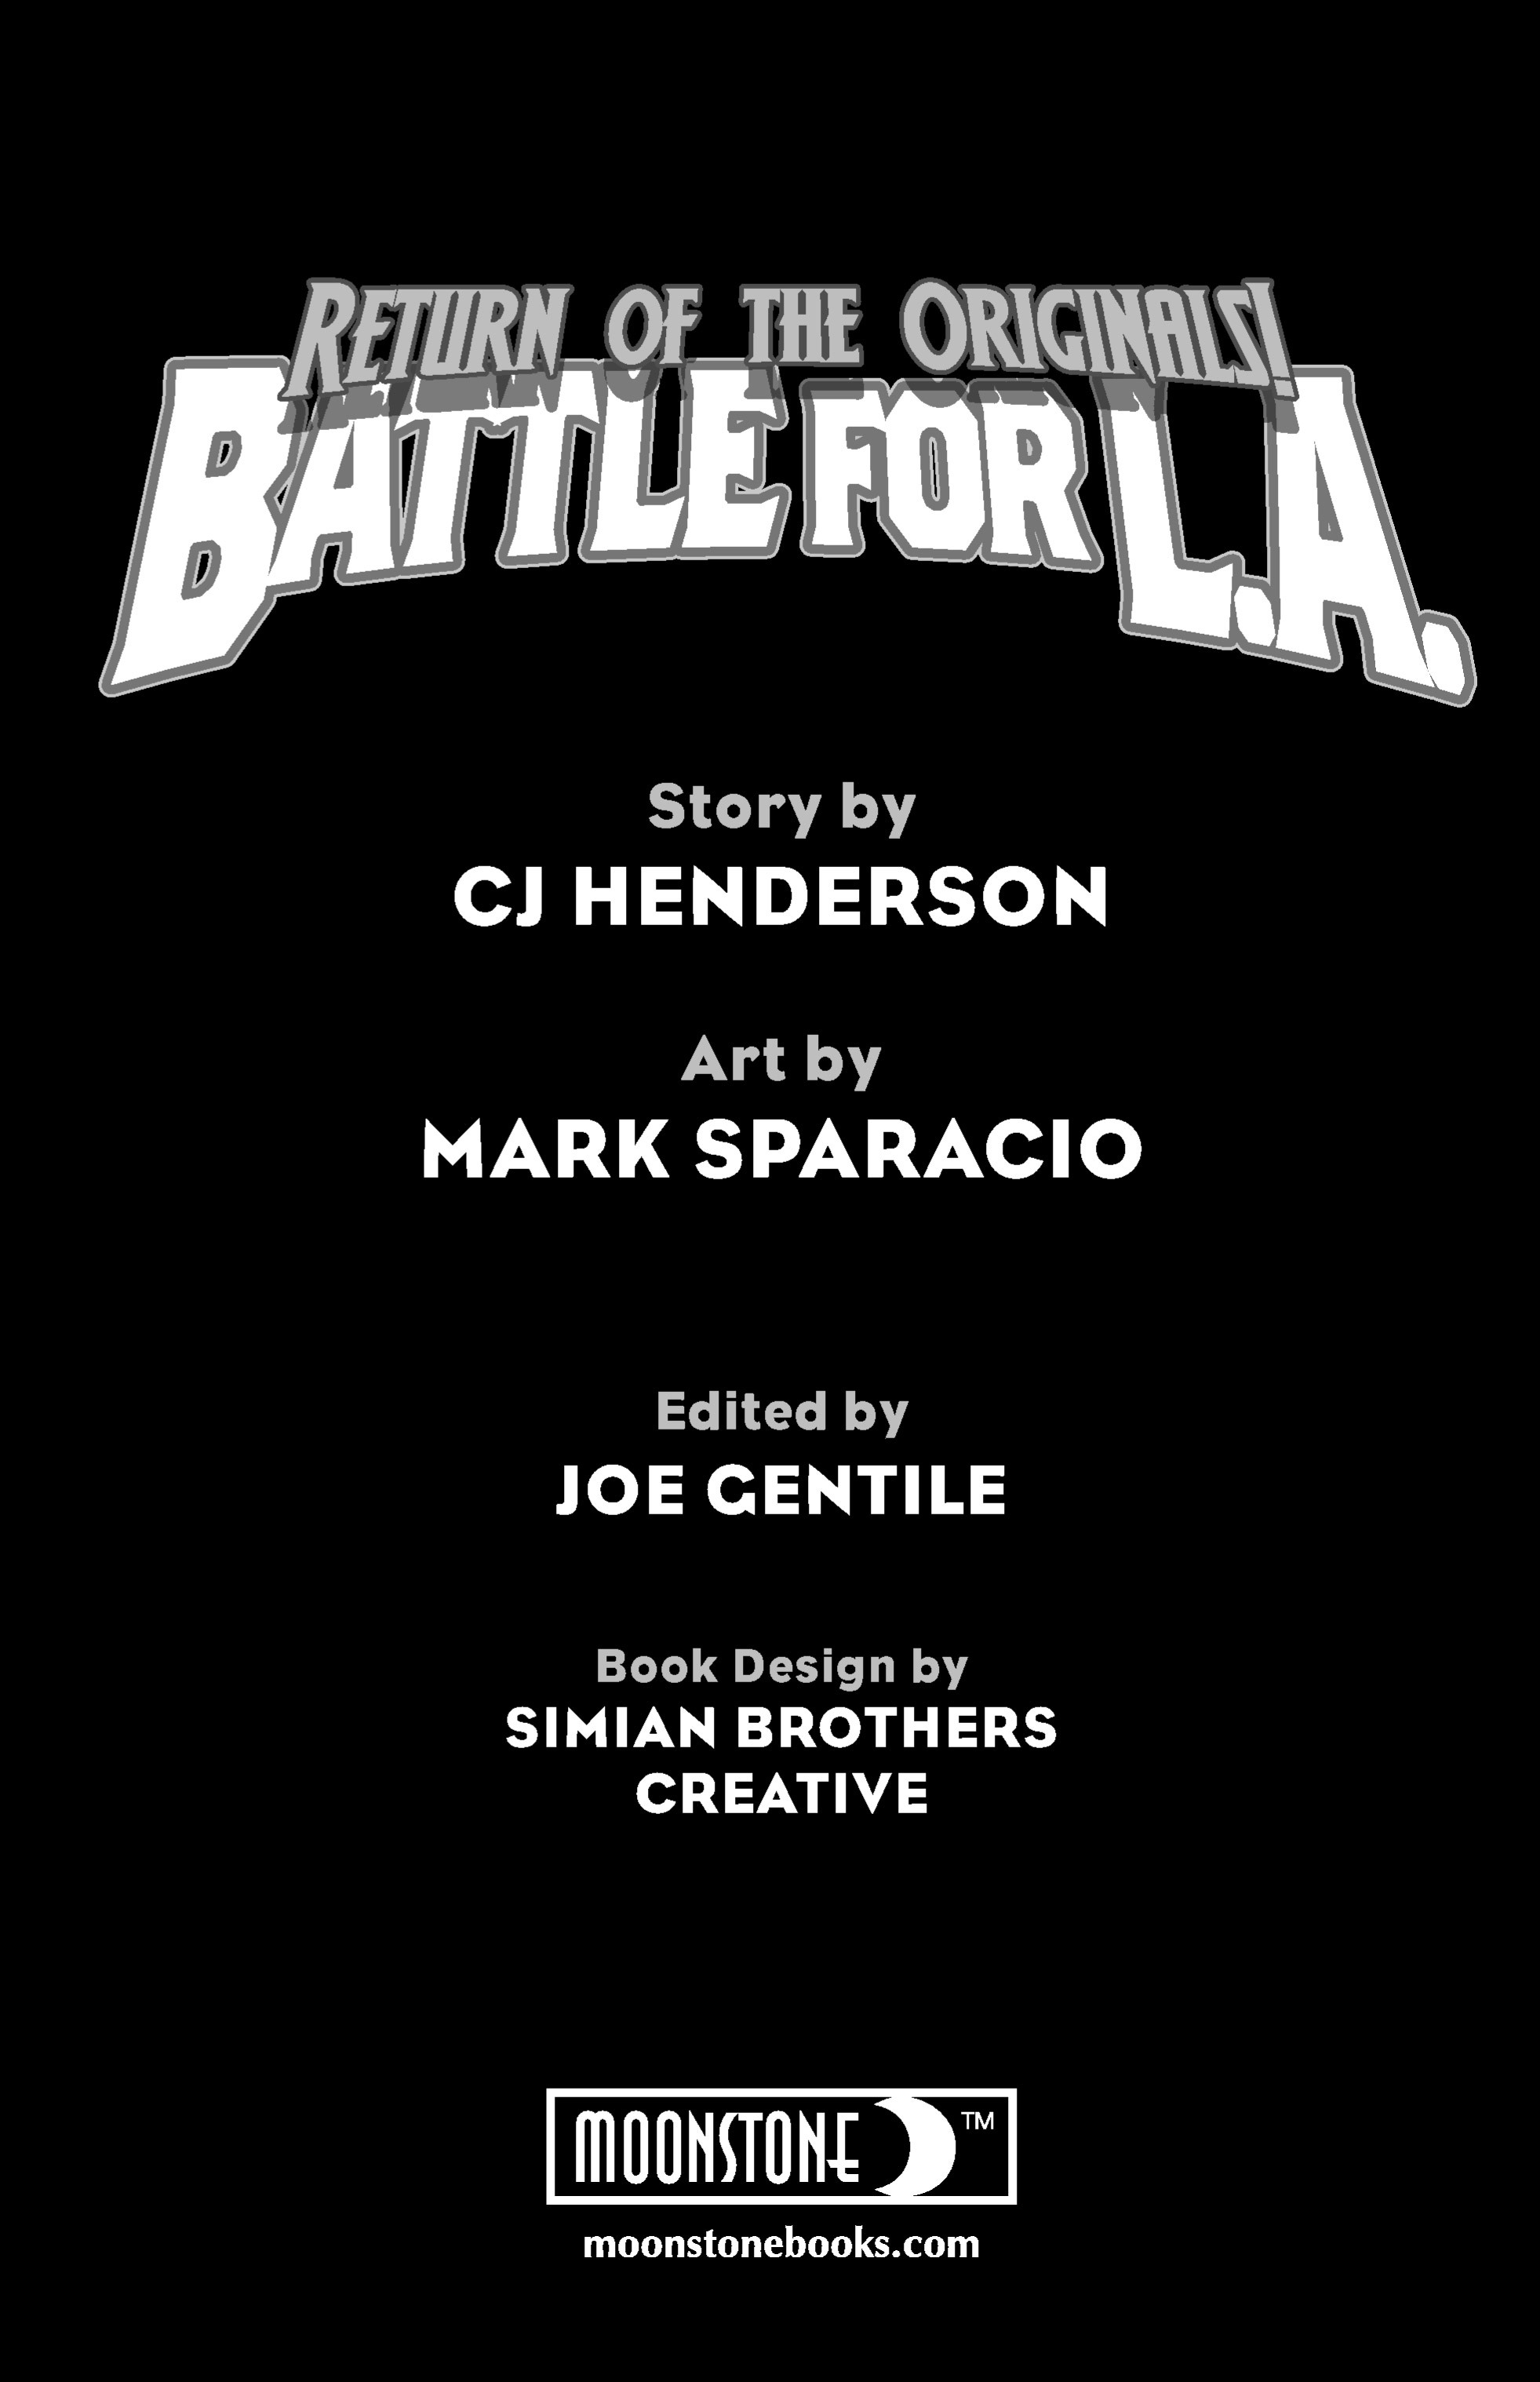 Read online Battle For L.A. comic -  Issue # Full - 2